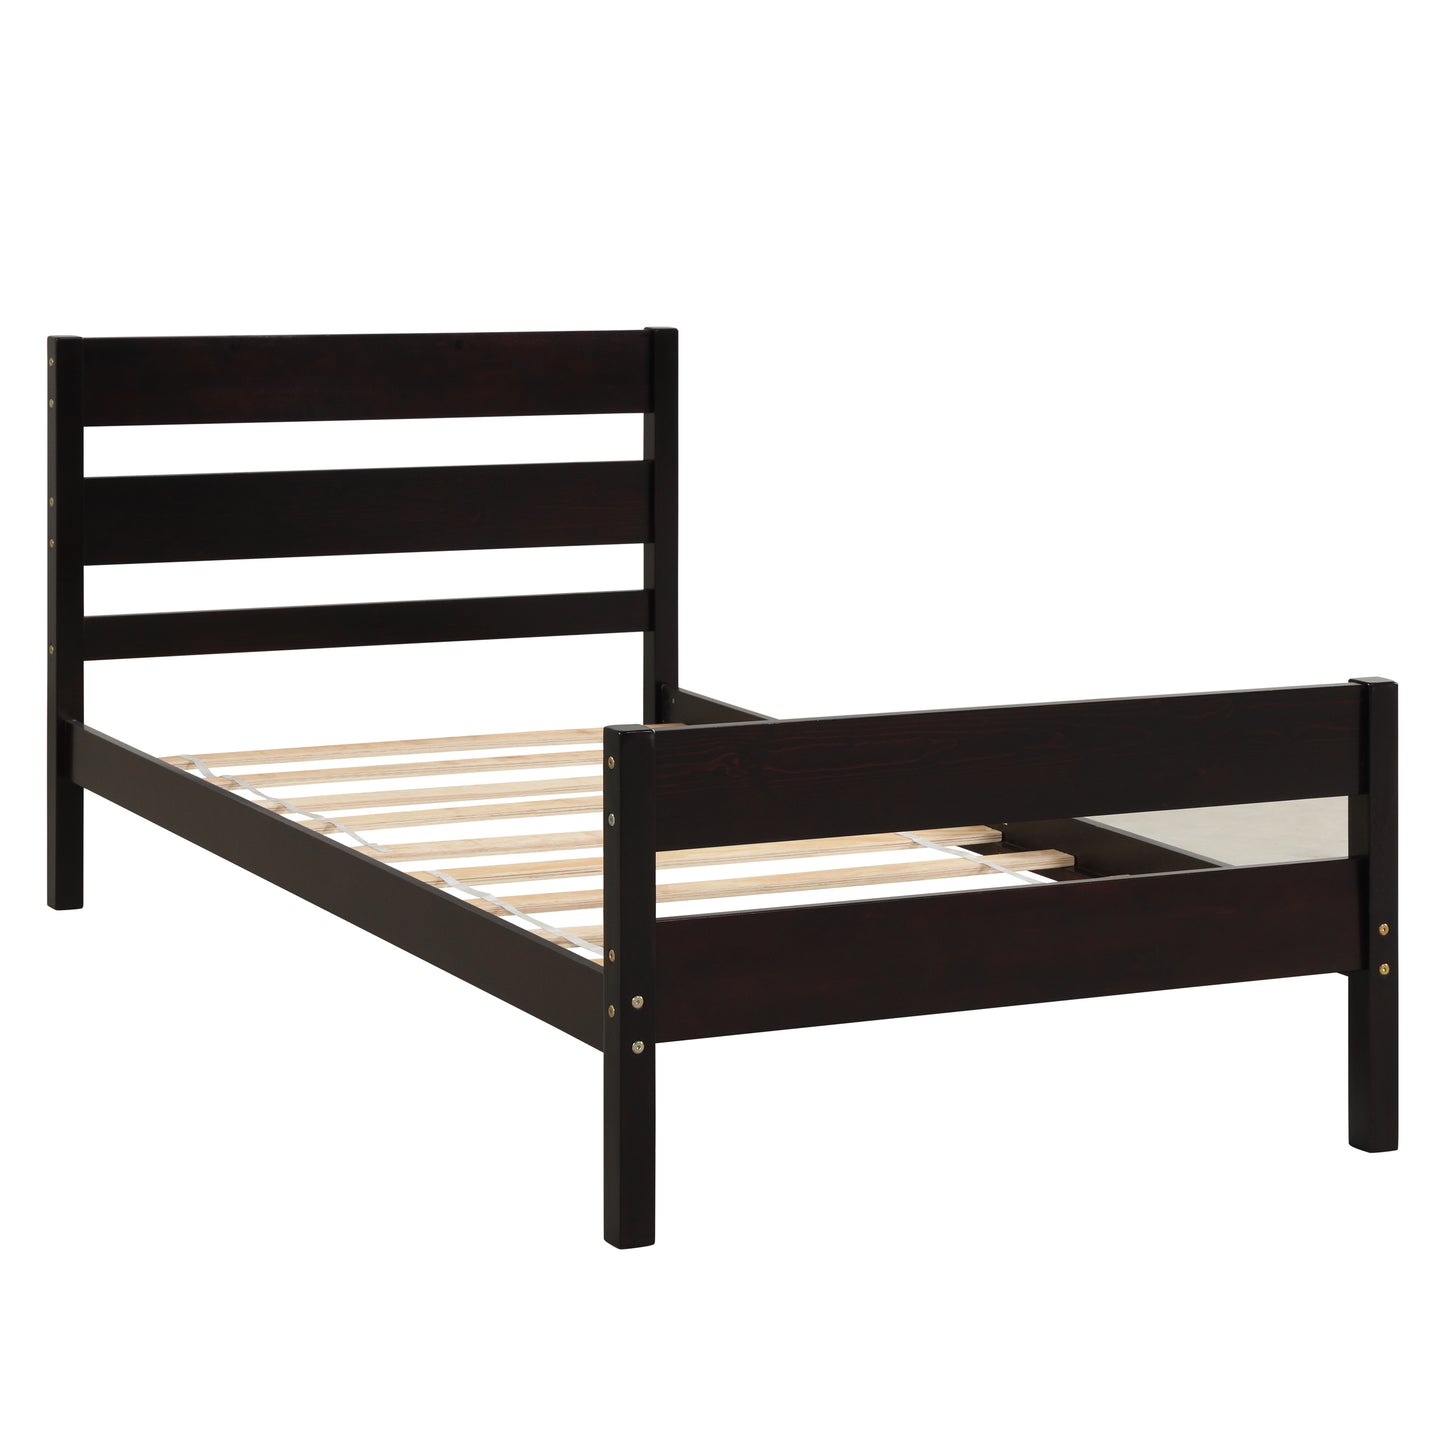 SYNGAR Twin Size Wood Platform Bed Frame with Headboard and Footboard, Underbed Storage, Mattress Foundation with Strong Wooden Slat Support, No Box Spring Needed, Espresso